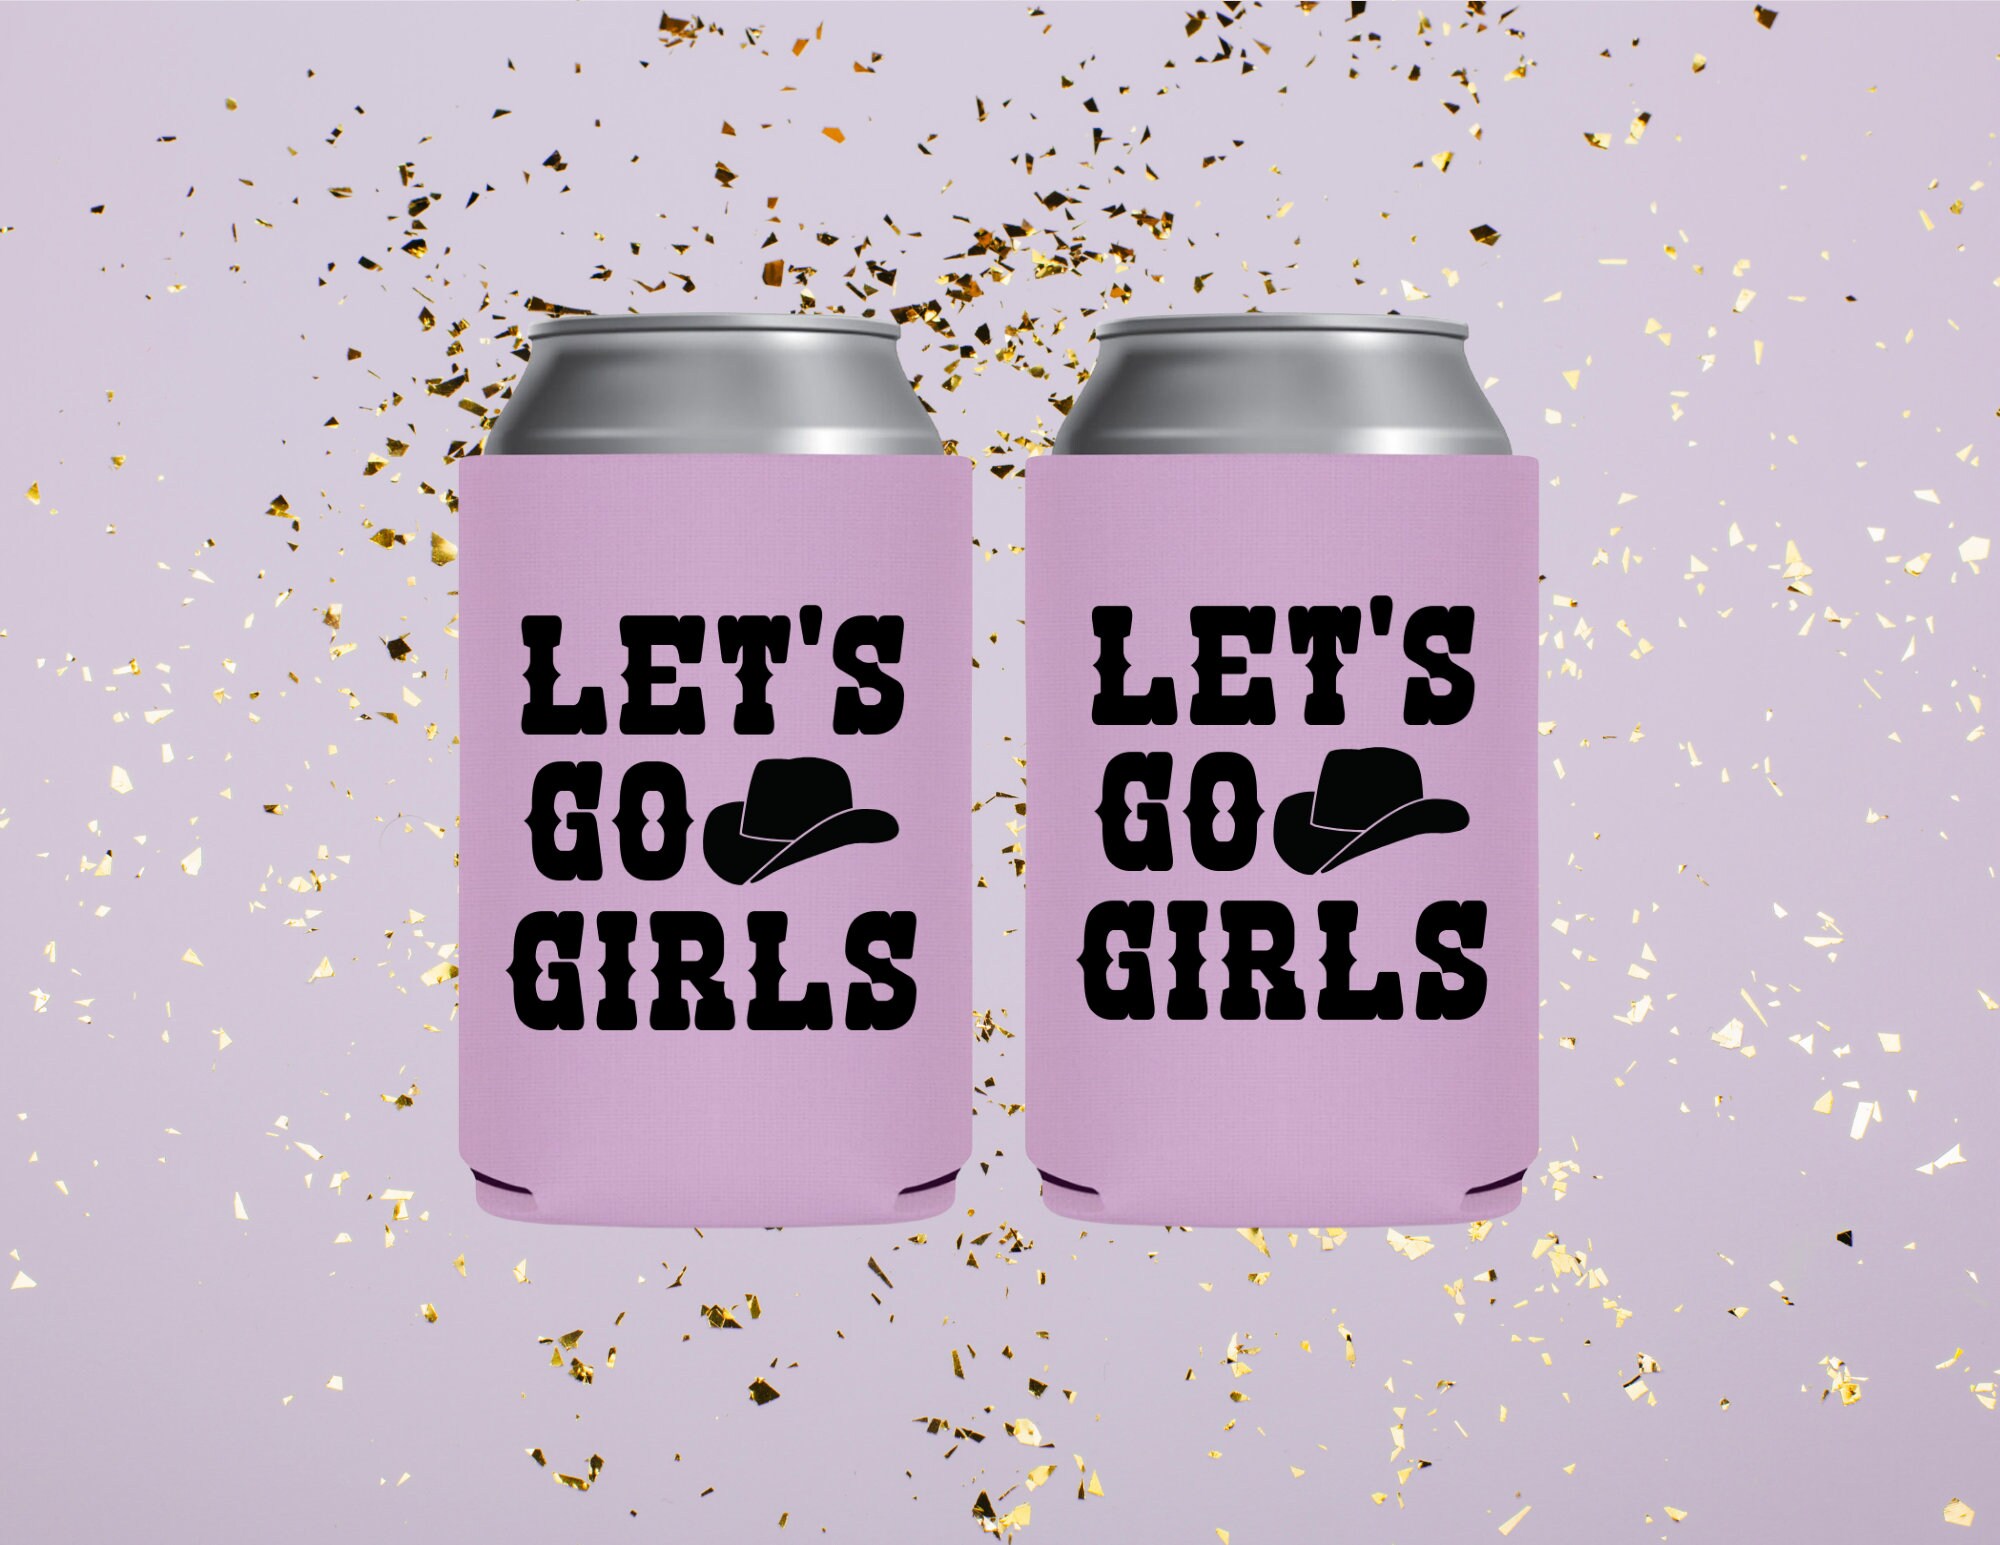 60087 Girls Night Out Details about   Bachelorette Party Koozies Favors Ideas 